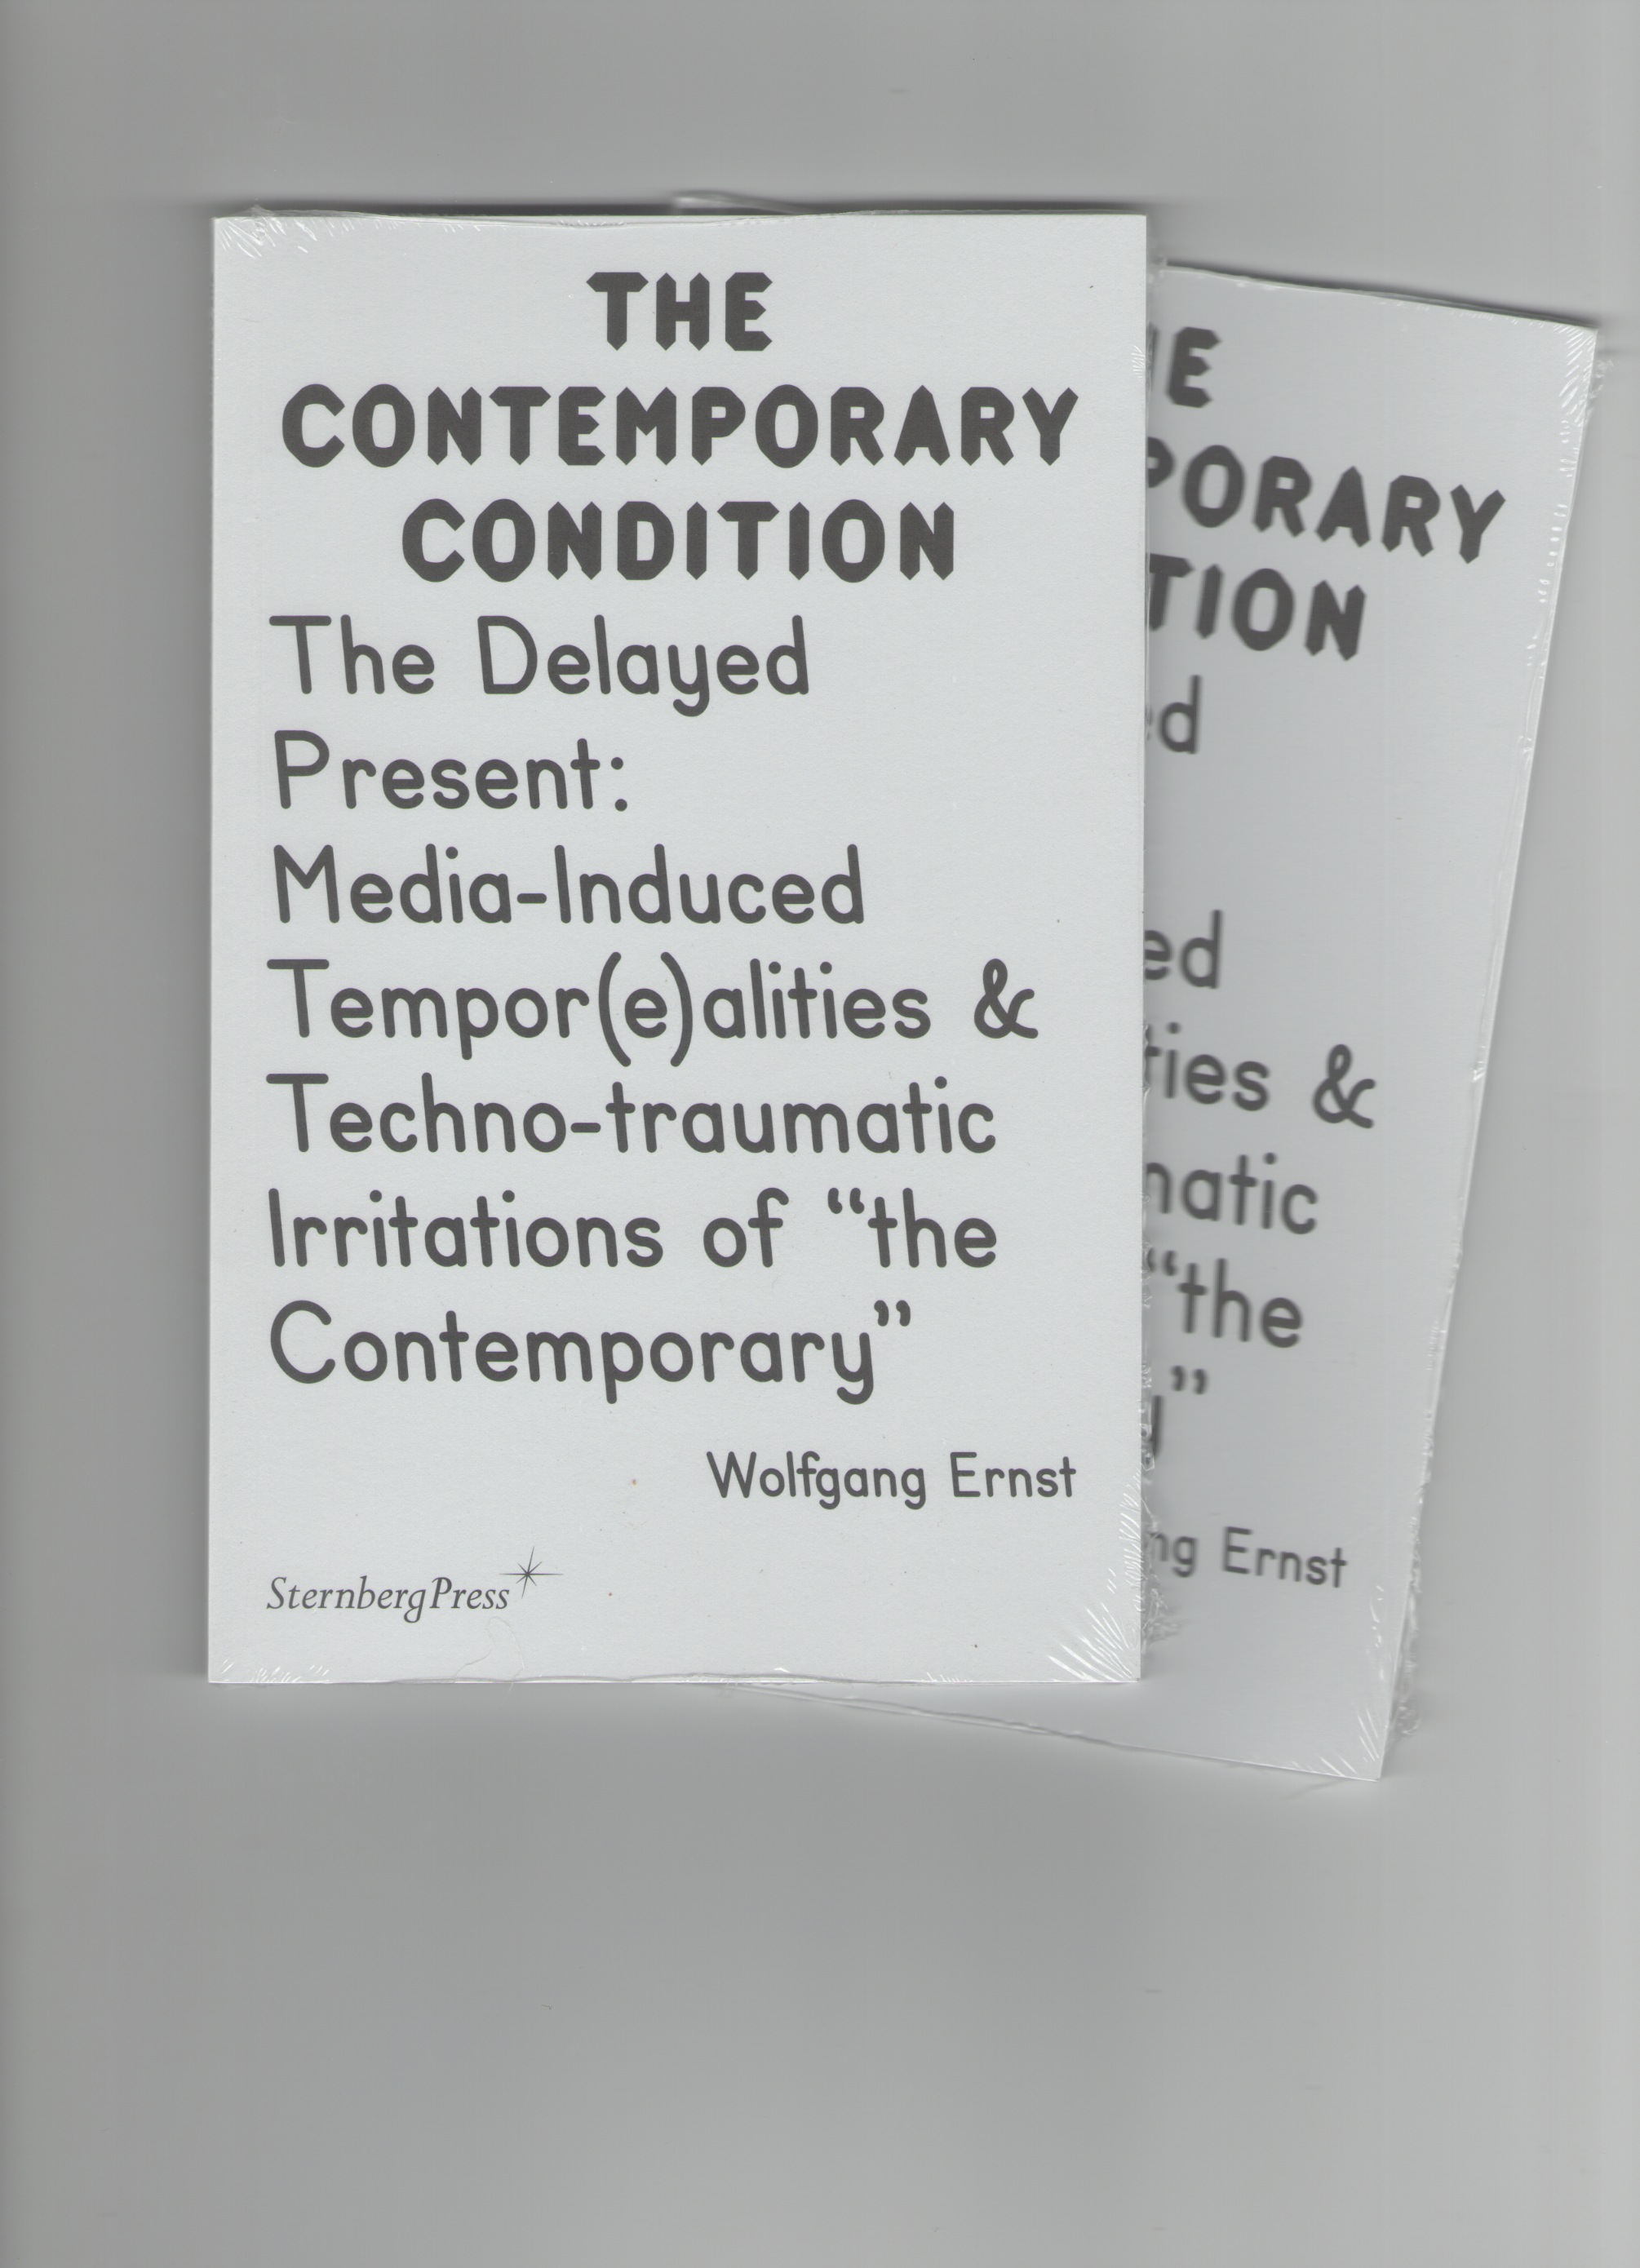 ERNST, Wolfgang - The Contemporary Condition. The Delayed Present Media-Induced Tempor(e)alities & Techno-traumatic Irritations of “the Contemporary”